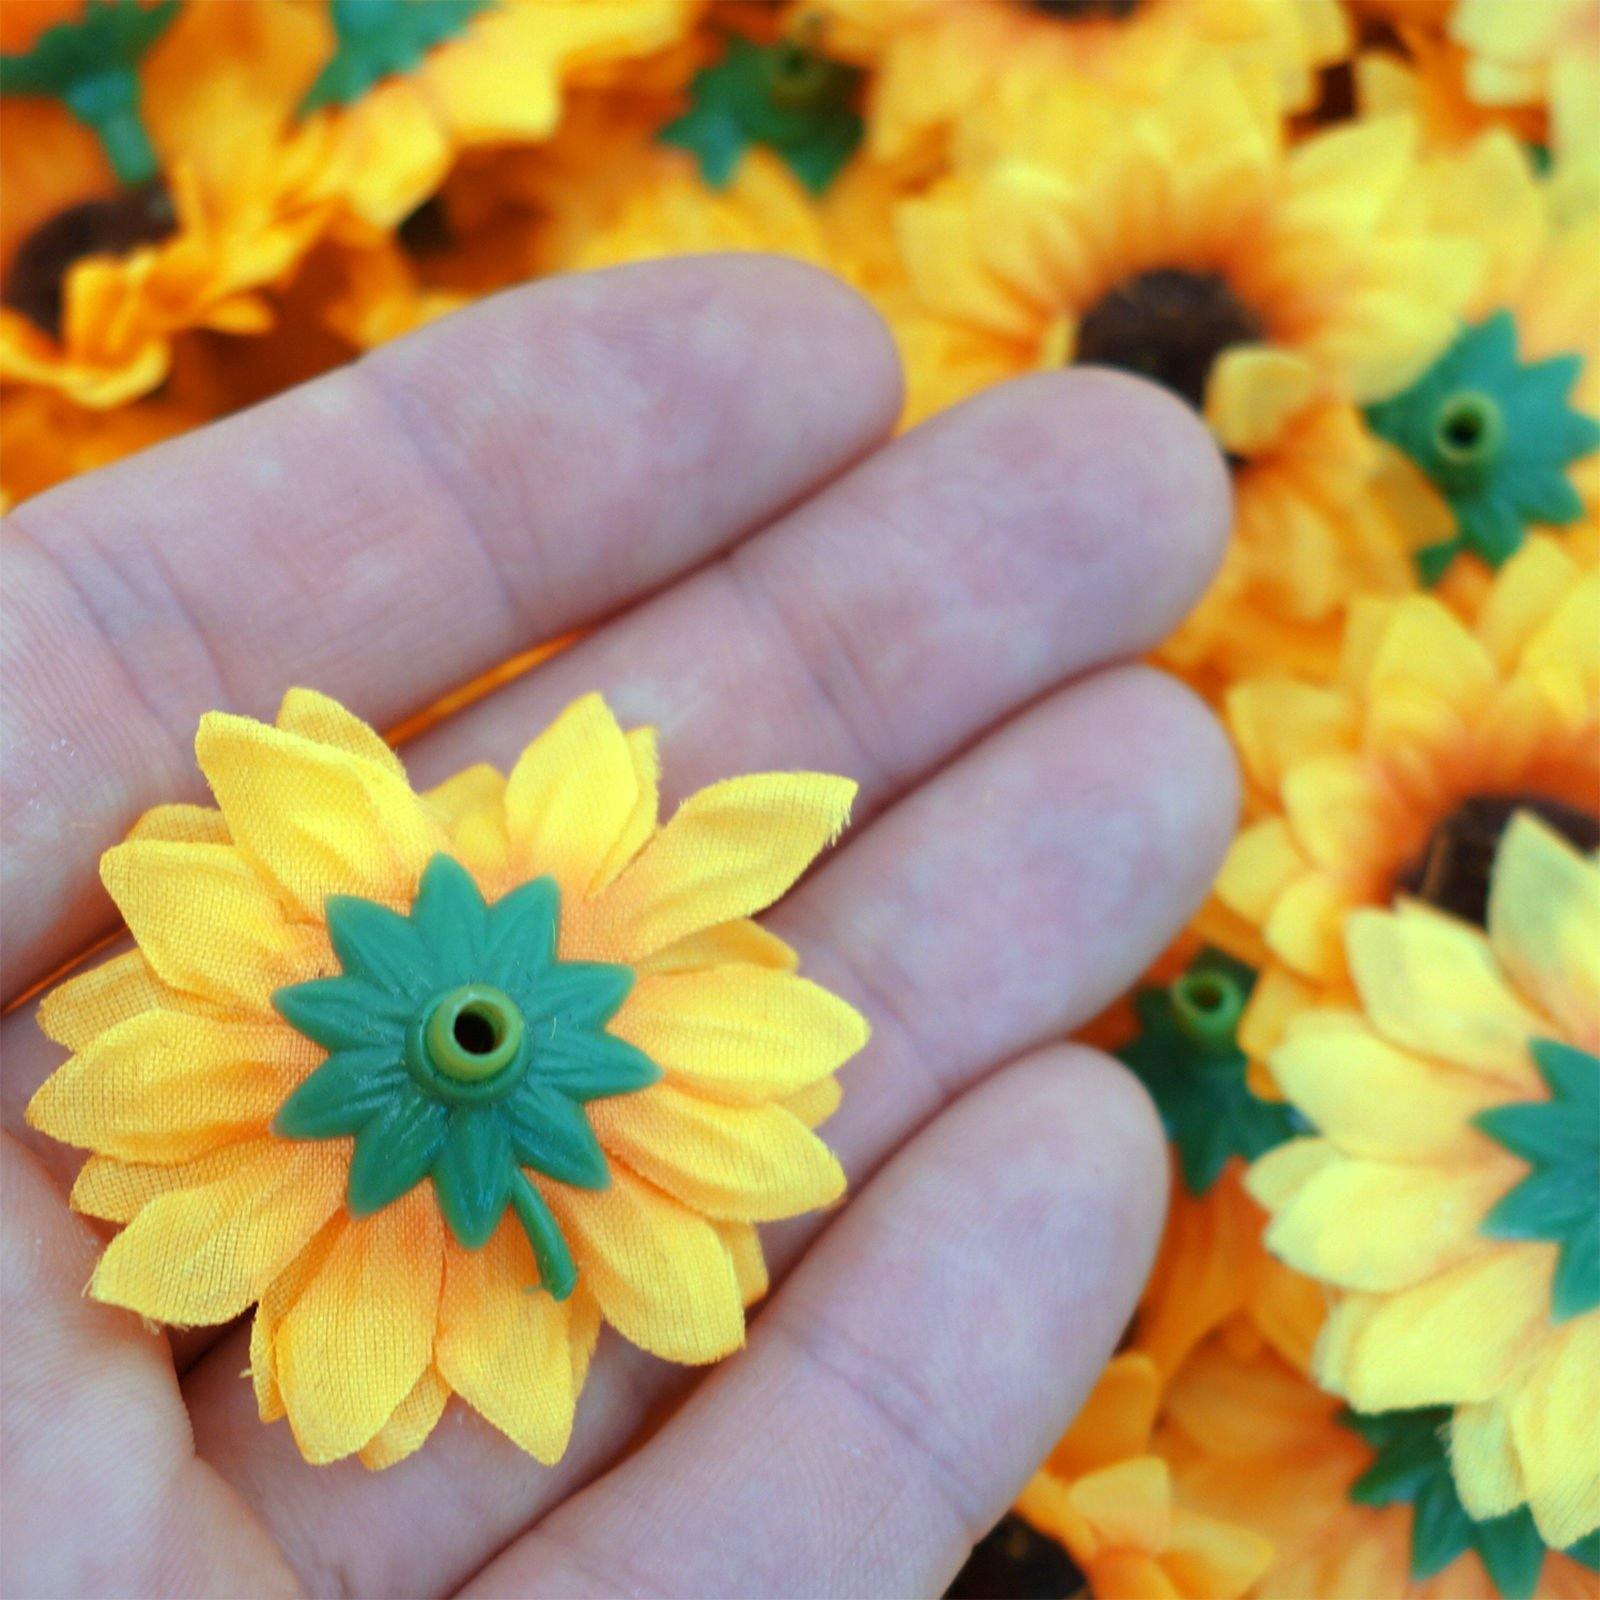 Artificial Sunflowers Flower Heads Silk Fake Flowers for Hair Clips Hairbands